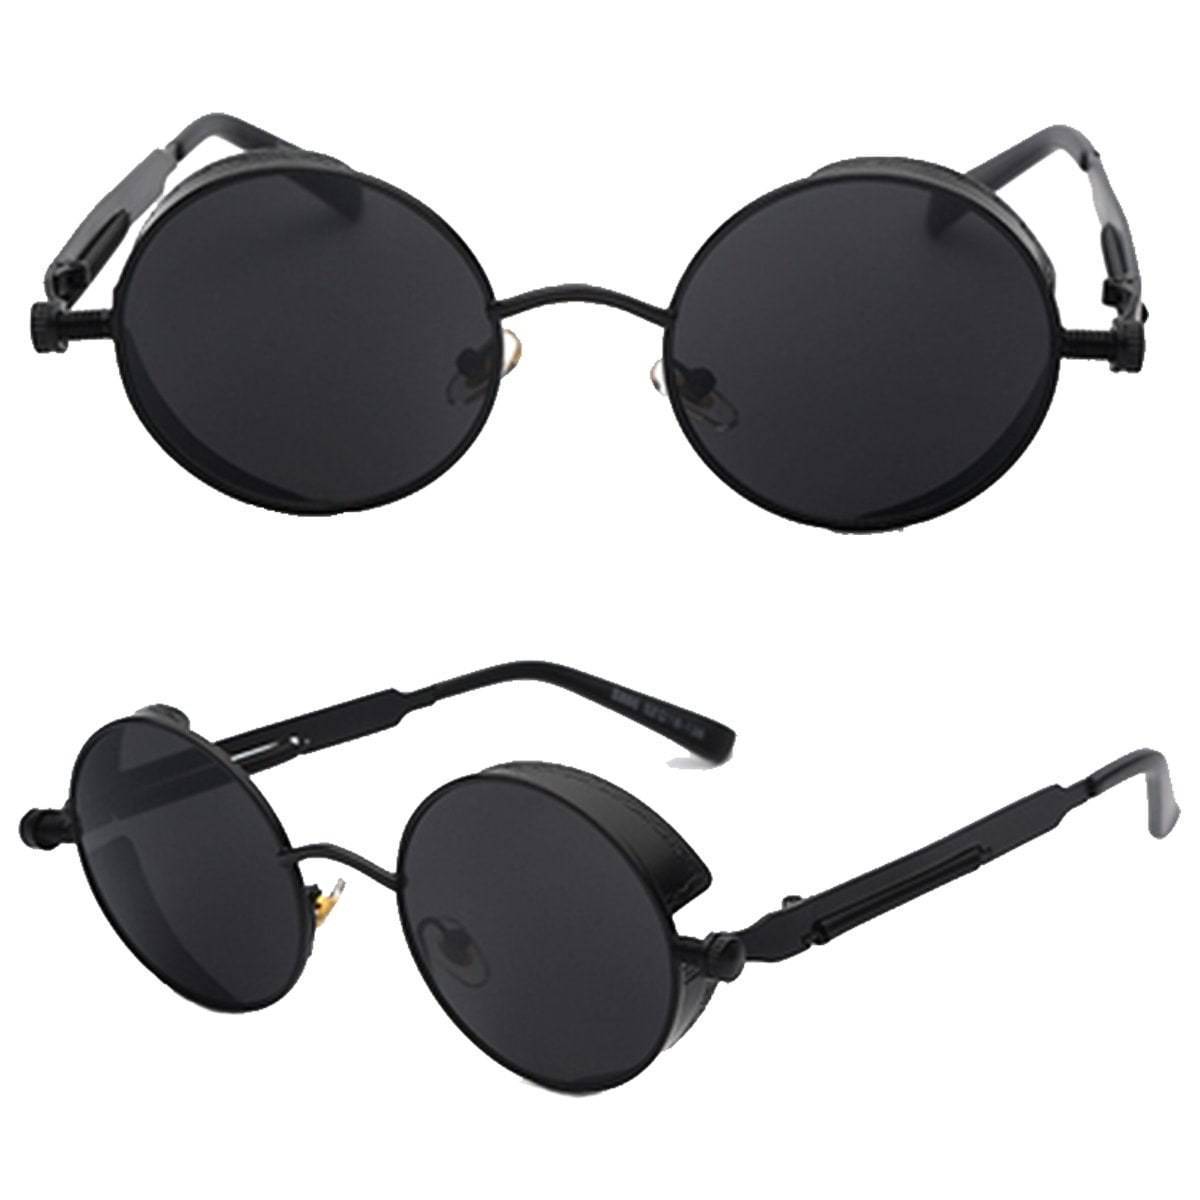 A pair of Rebel Sunglasses with black lenses.